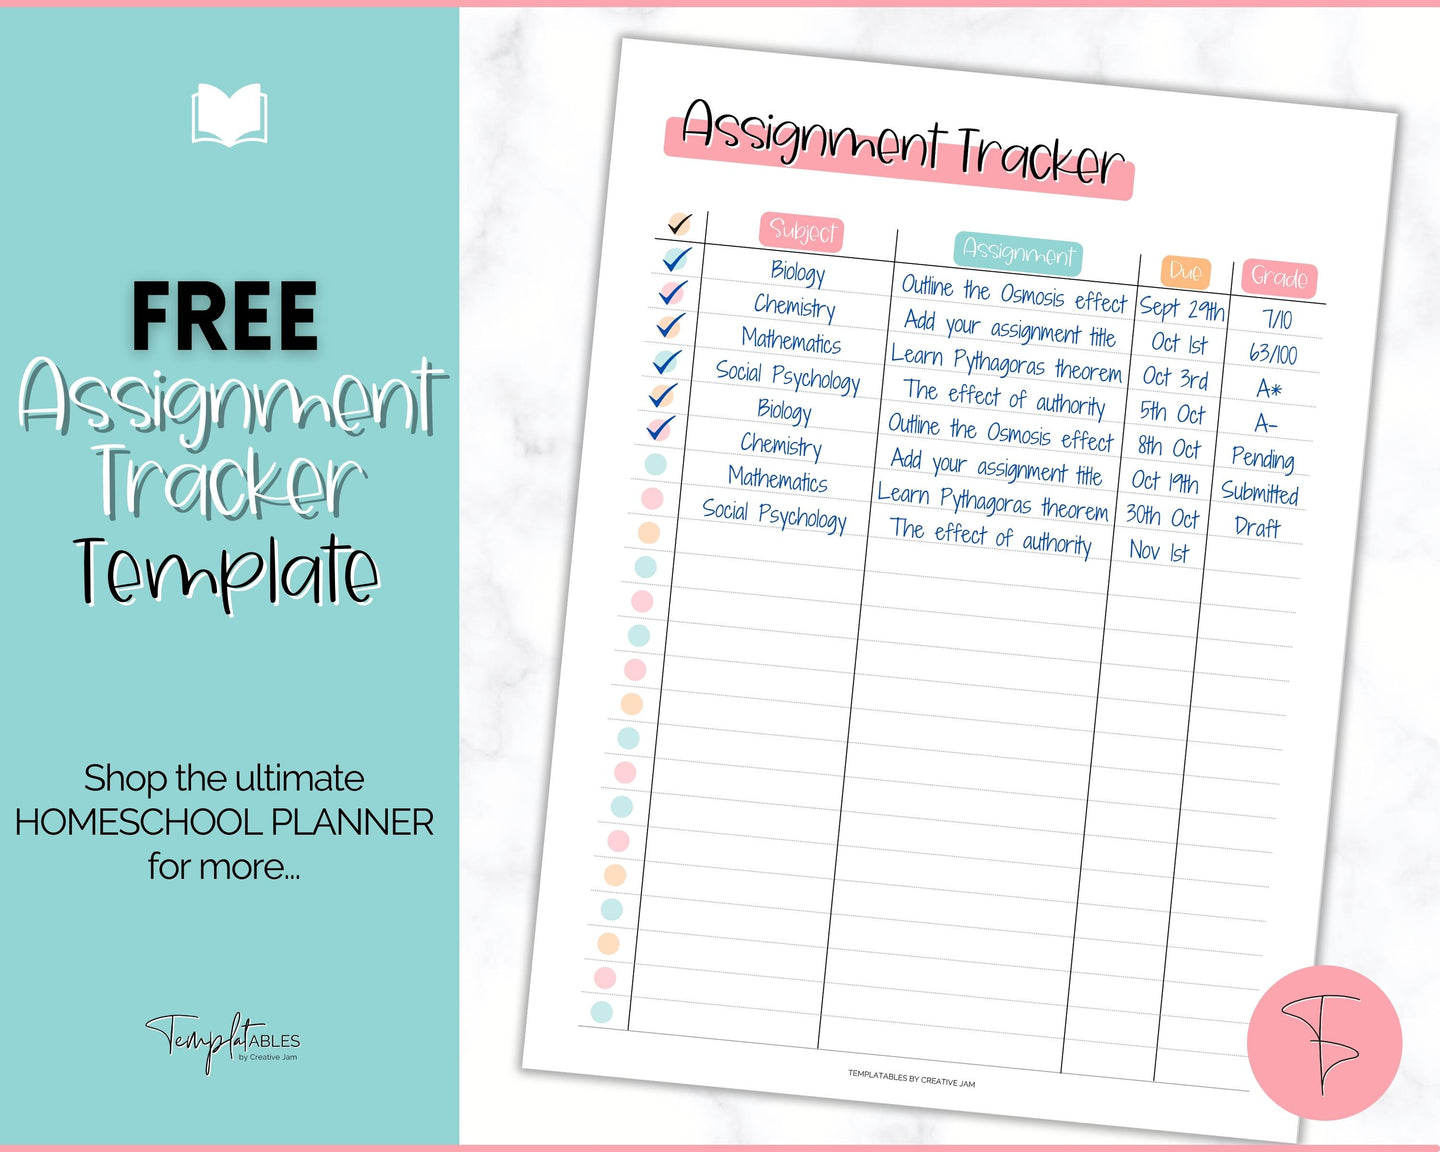 FREE - Assignment Tracker Printable for Students, Academic Homework Planner, Study, College, Homeschool Template | Colorful Sky